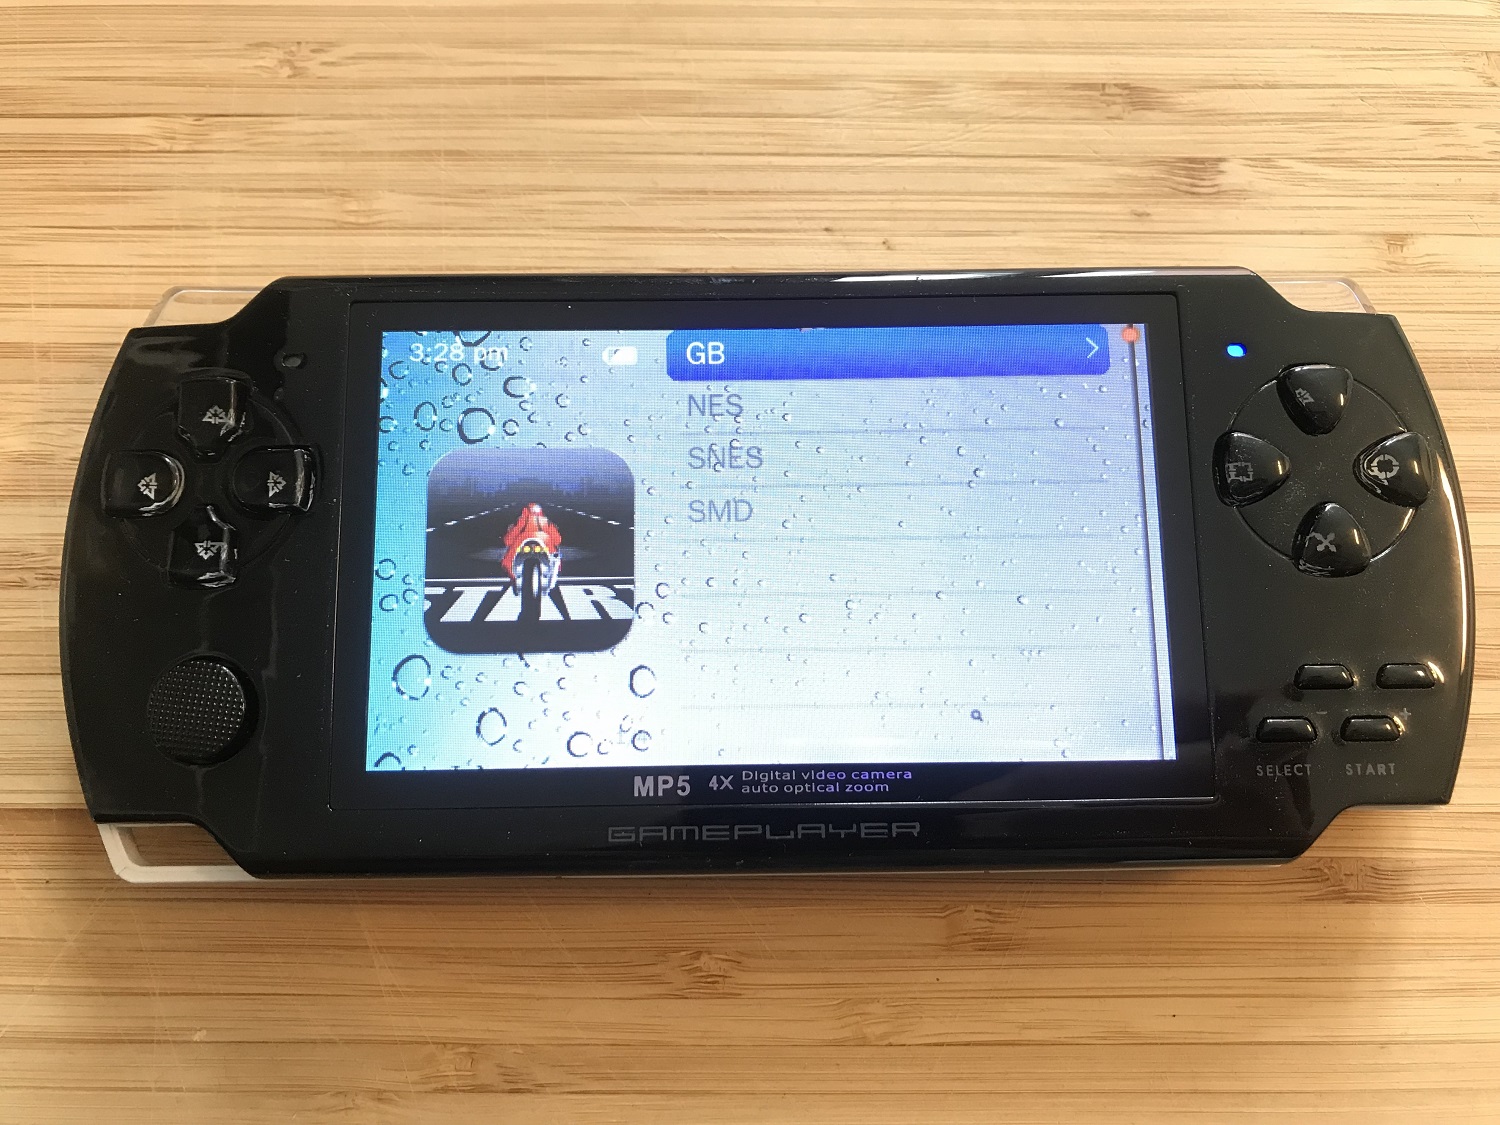 I just recently remembered how to put ISO's on my psp and I already have  Custom firmware on it but I have no idea how to add gba Roms or add a